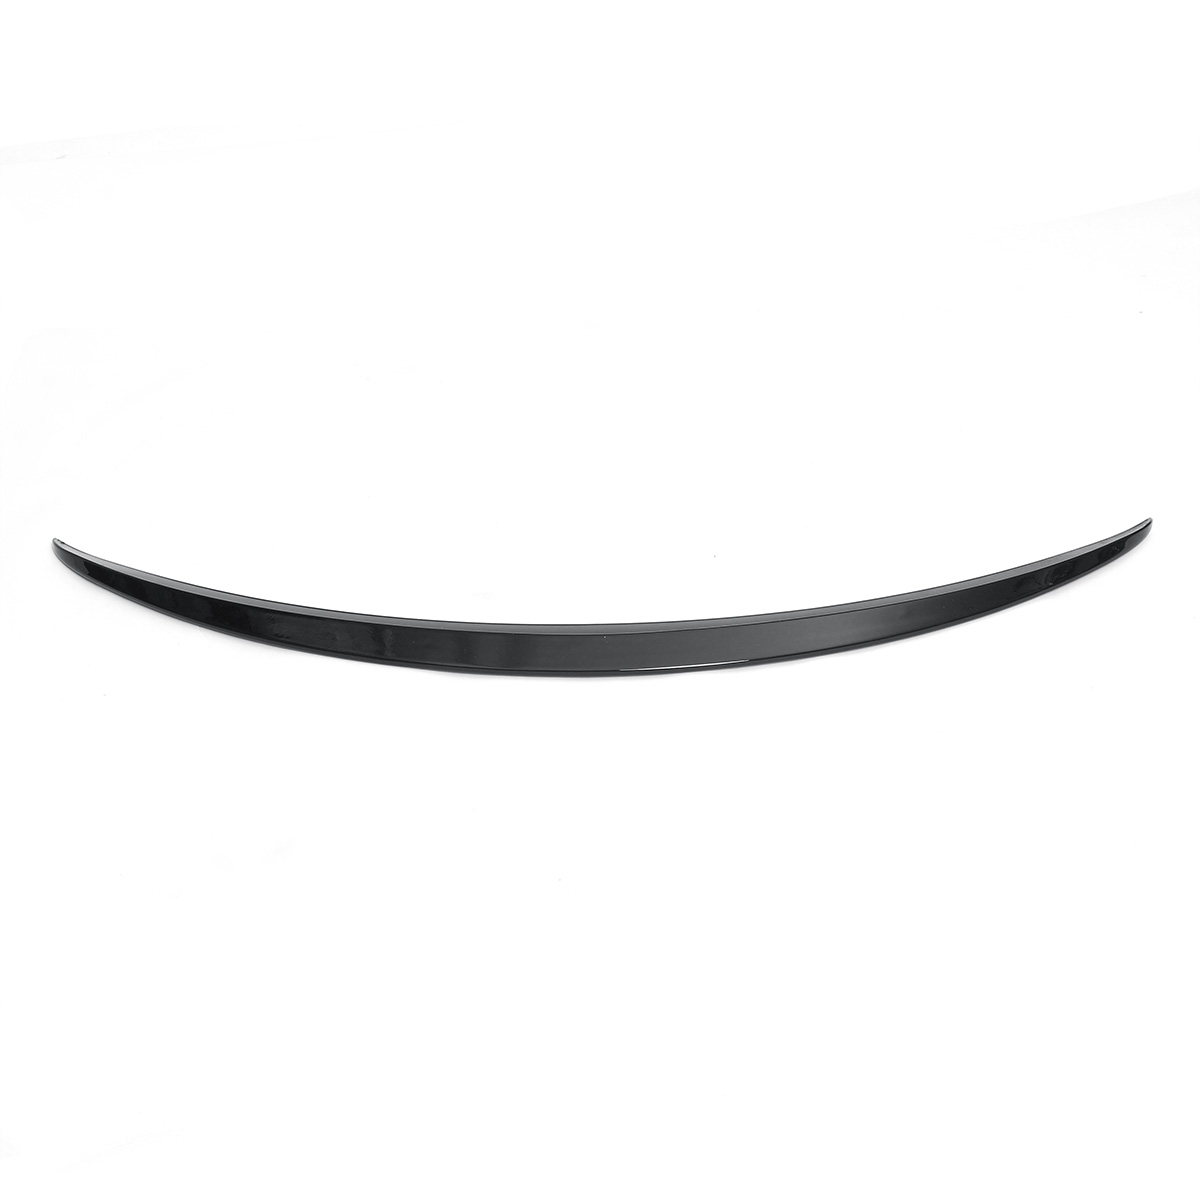 

Car Rear Boot Wing Trunk Spoiler ABS AMG C63 LOOK For Mercedes Benz C Class W205